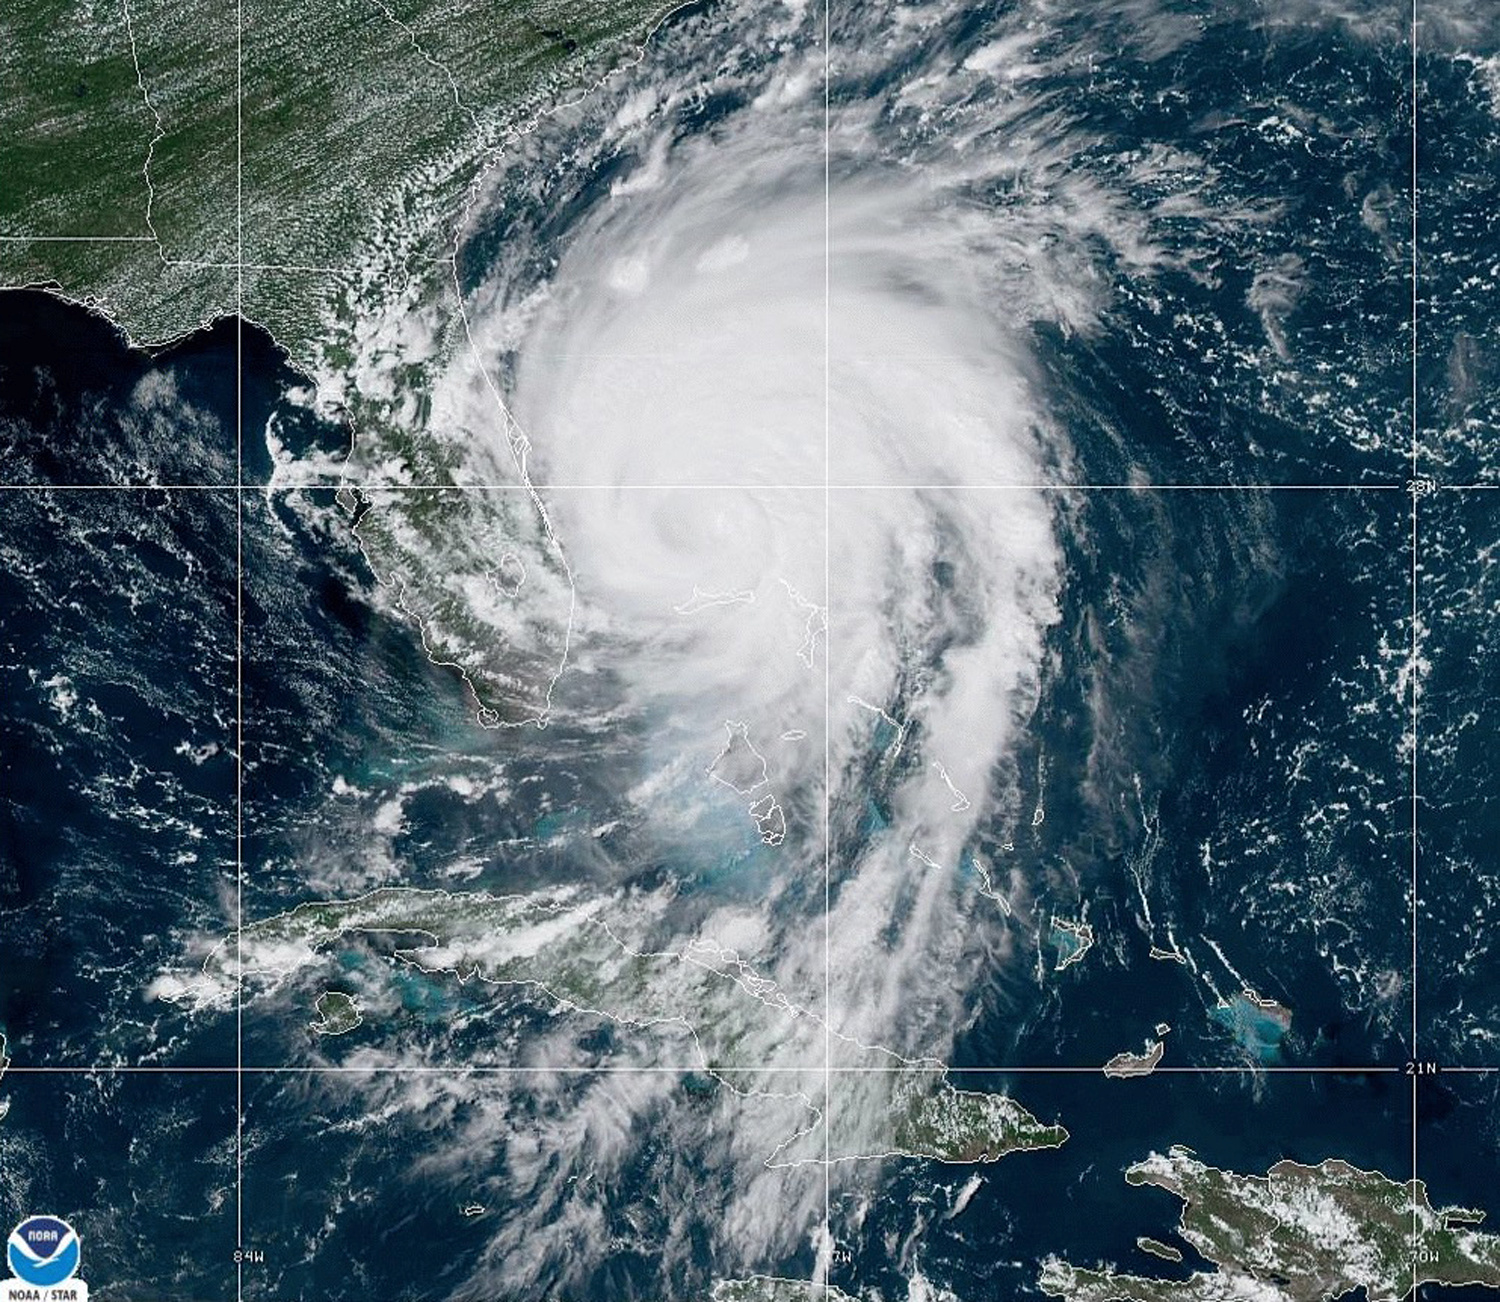 Hurricane Dorian is shown situated off the east coast of Florida, U.S., in this satellite photo released September 3, 2019.  NOAA/NESDIS/STAR GOES-East/Handout via REUTERS   ATTENTION EDITORS - THIS IMAGE WAS PROVIDED BY A THIRD PARTY